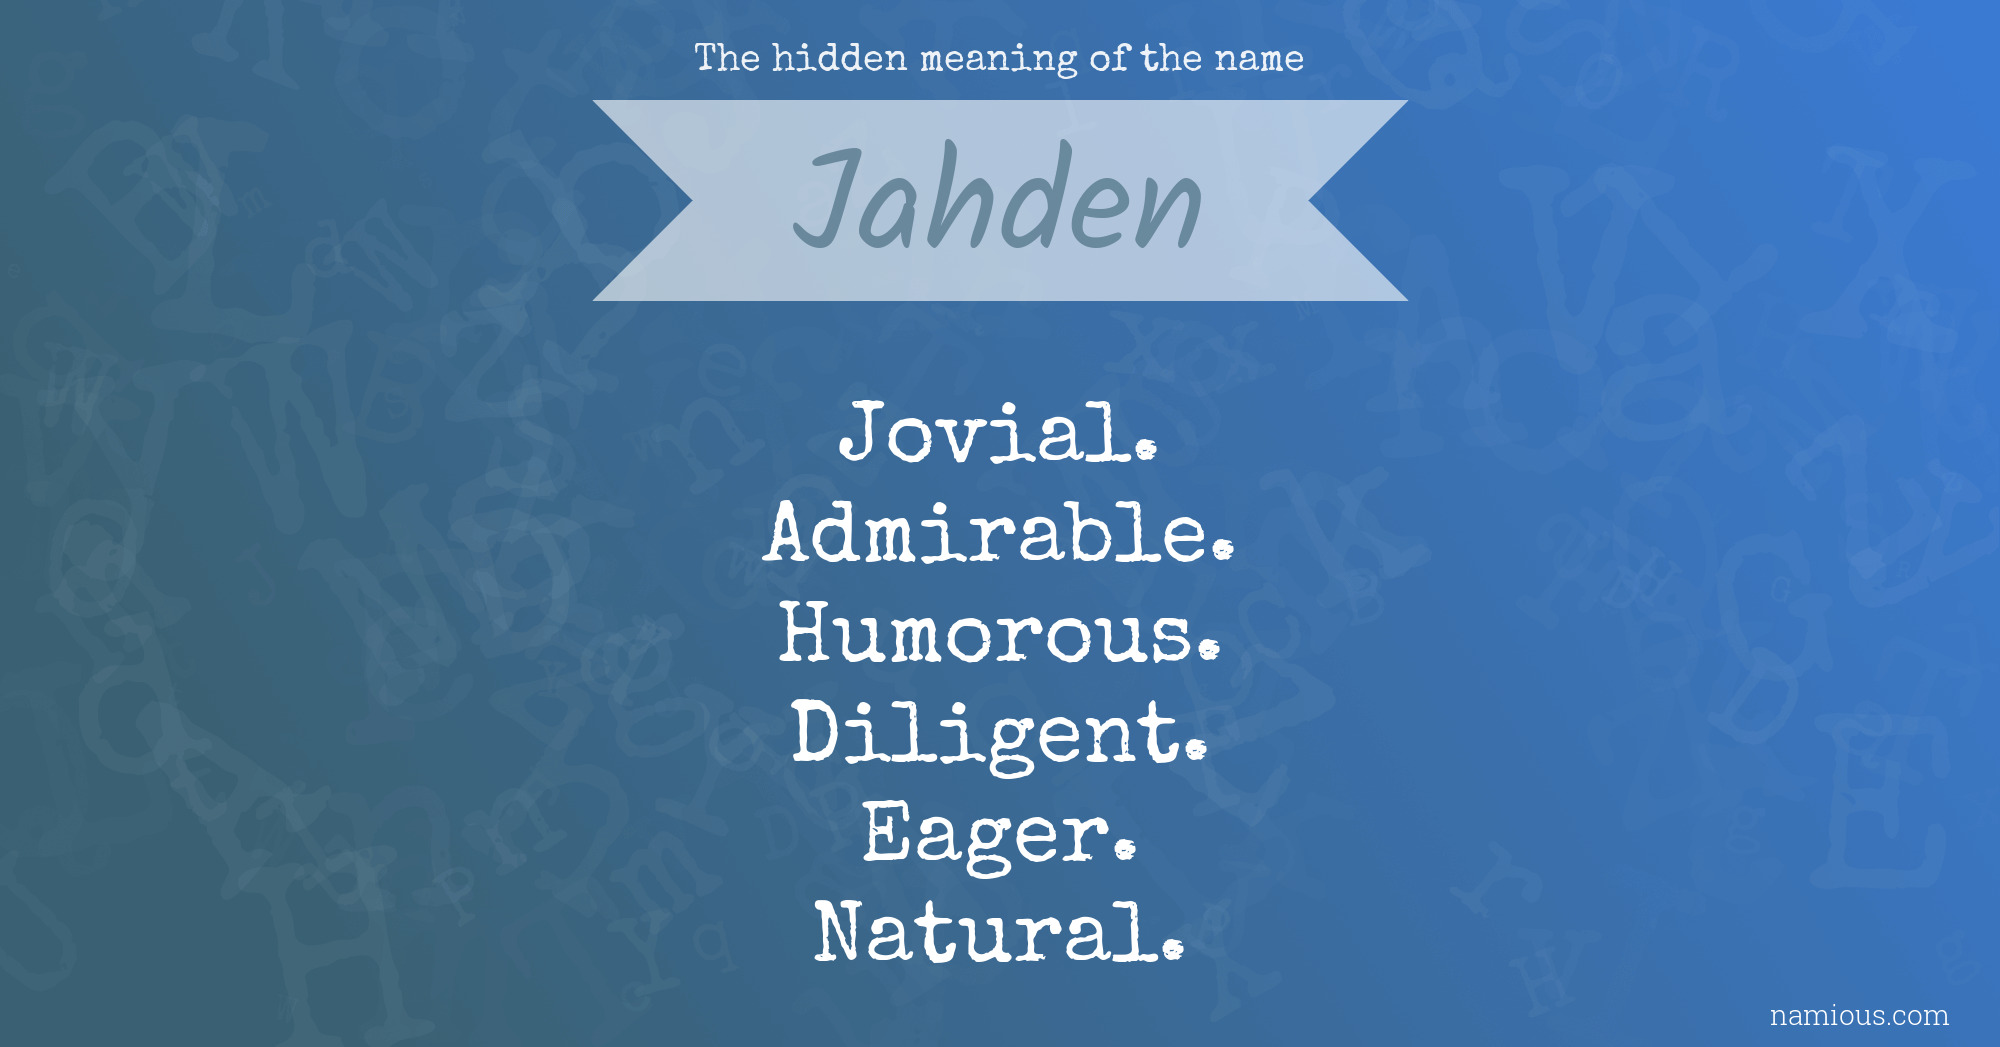 The hidden meaning of the name Jahden